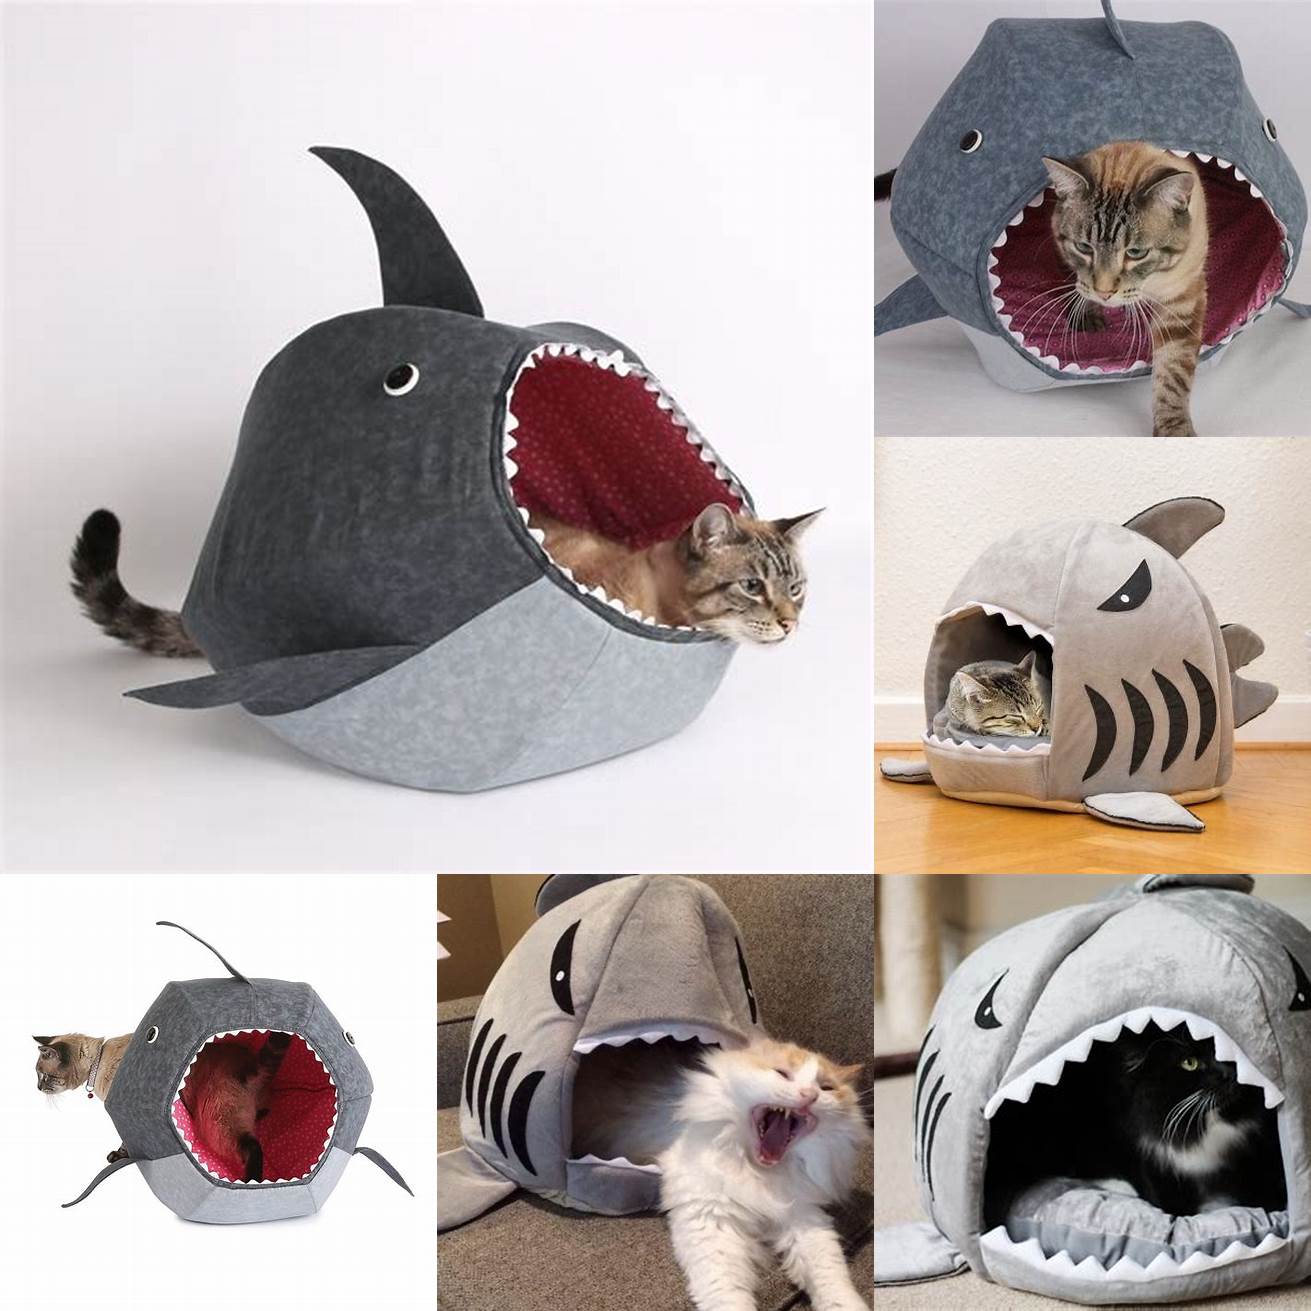 A group of kittens playing inside a giant shark bed